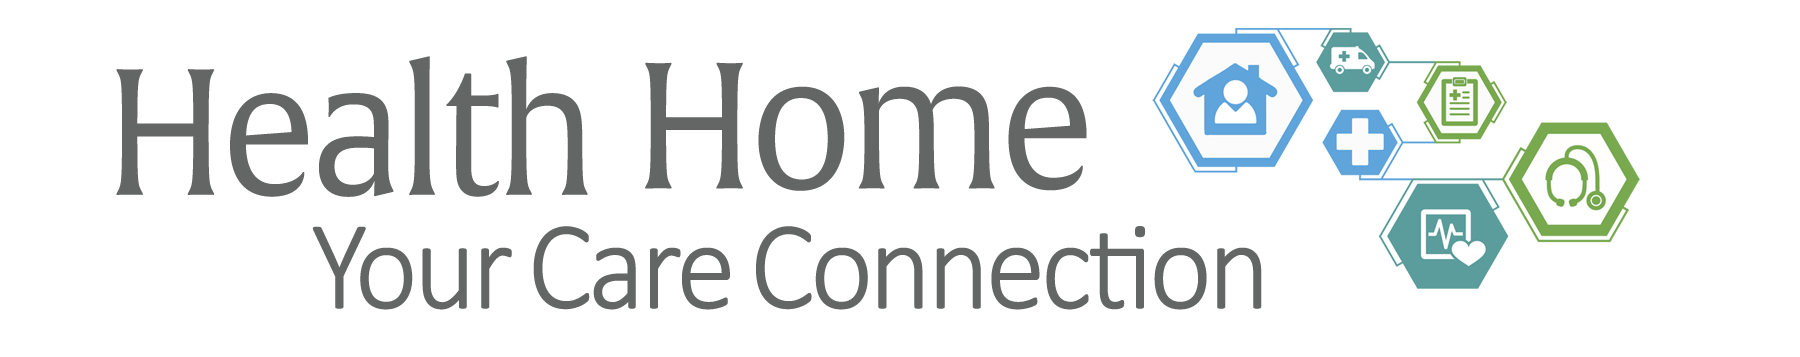 Health home logo with graphics